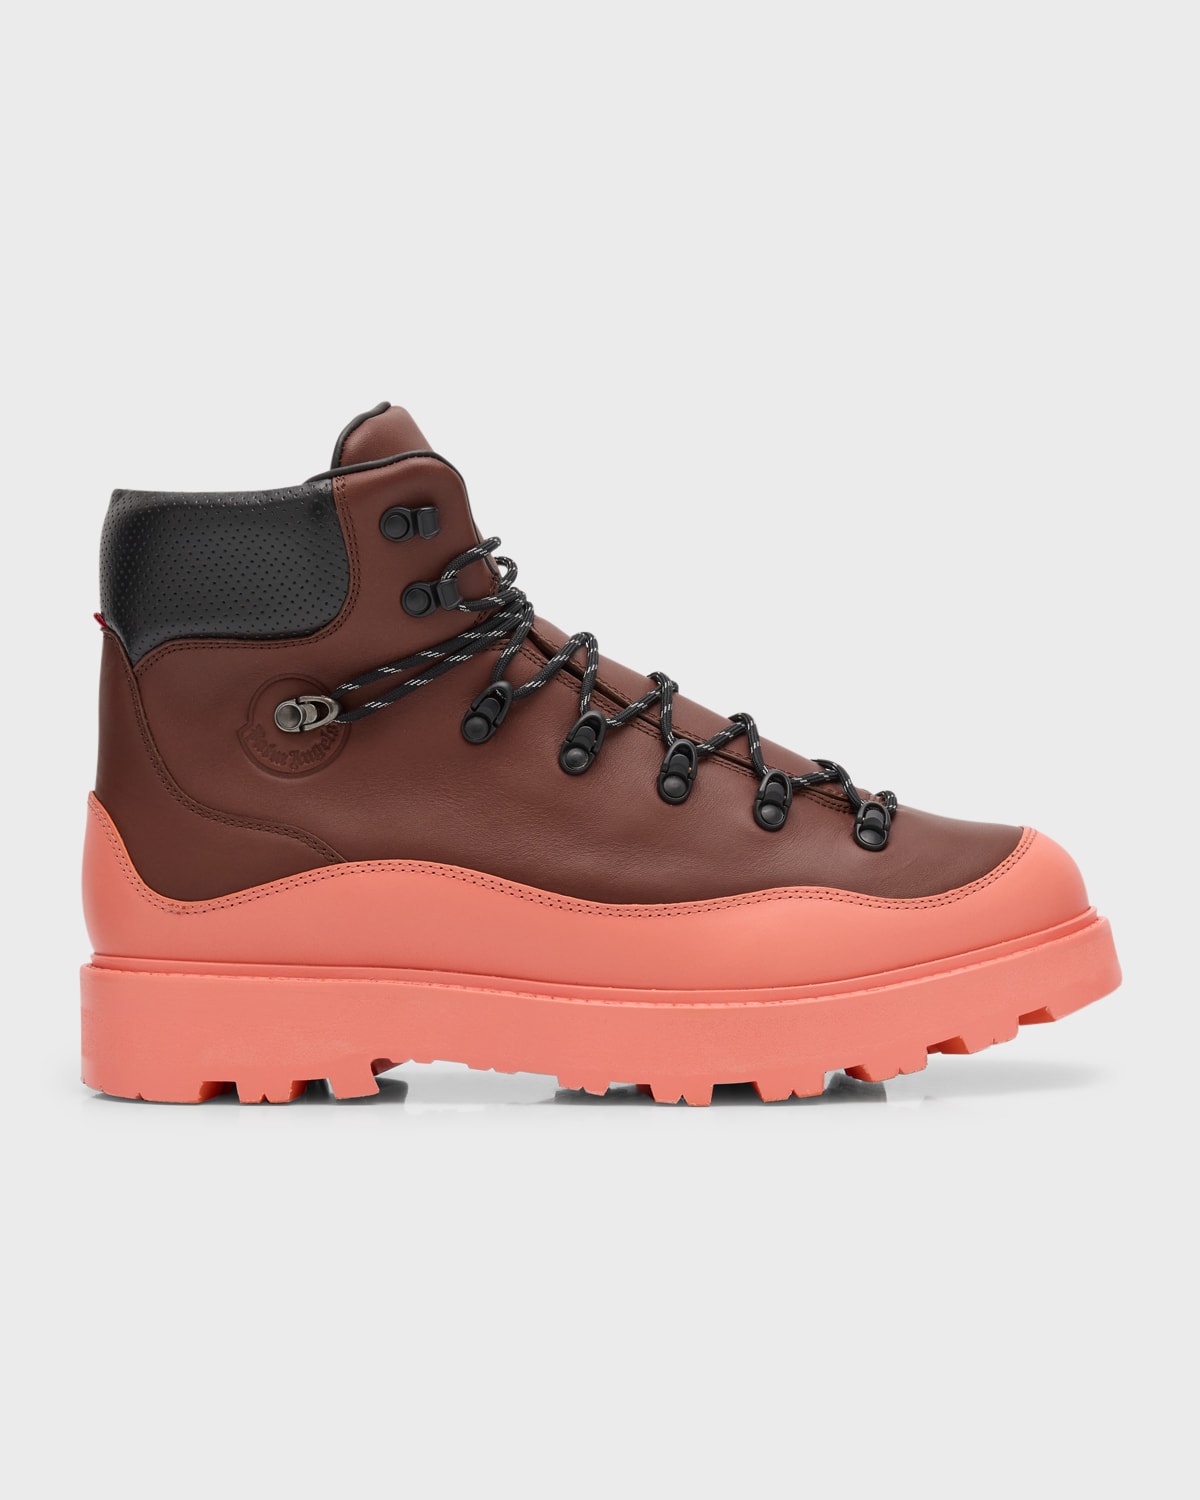 Moncler X Palm Angels Men's Peka Water-repellent Leather Hiking Boots In Brown Pink